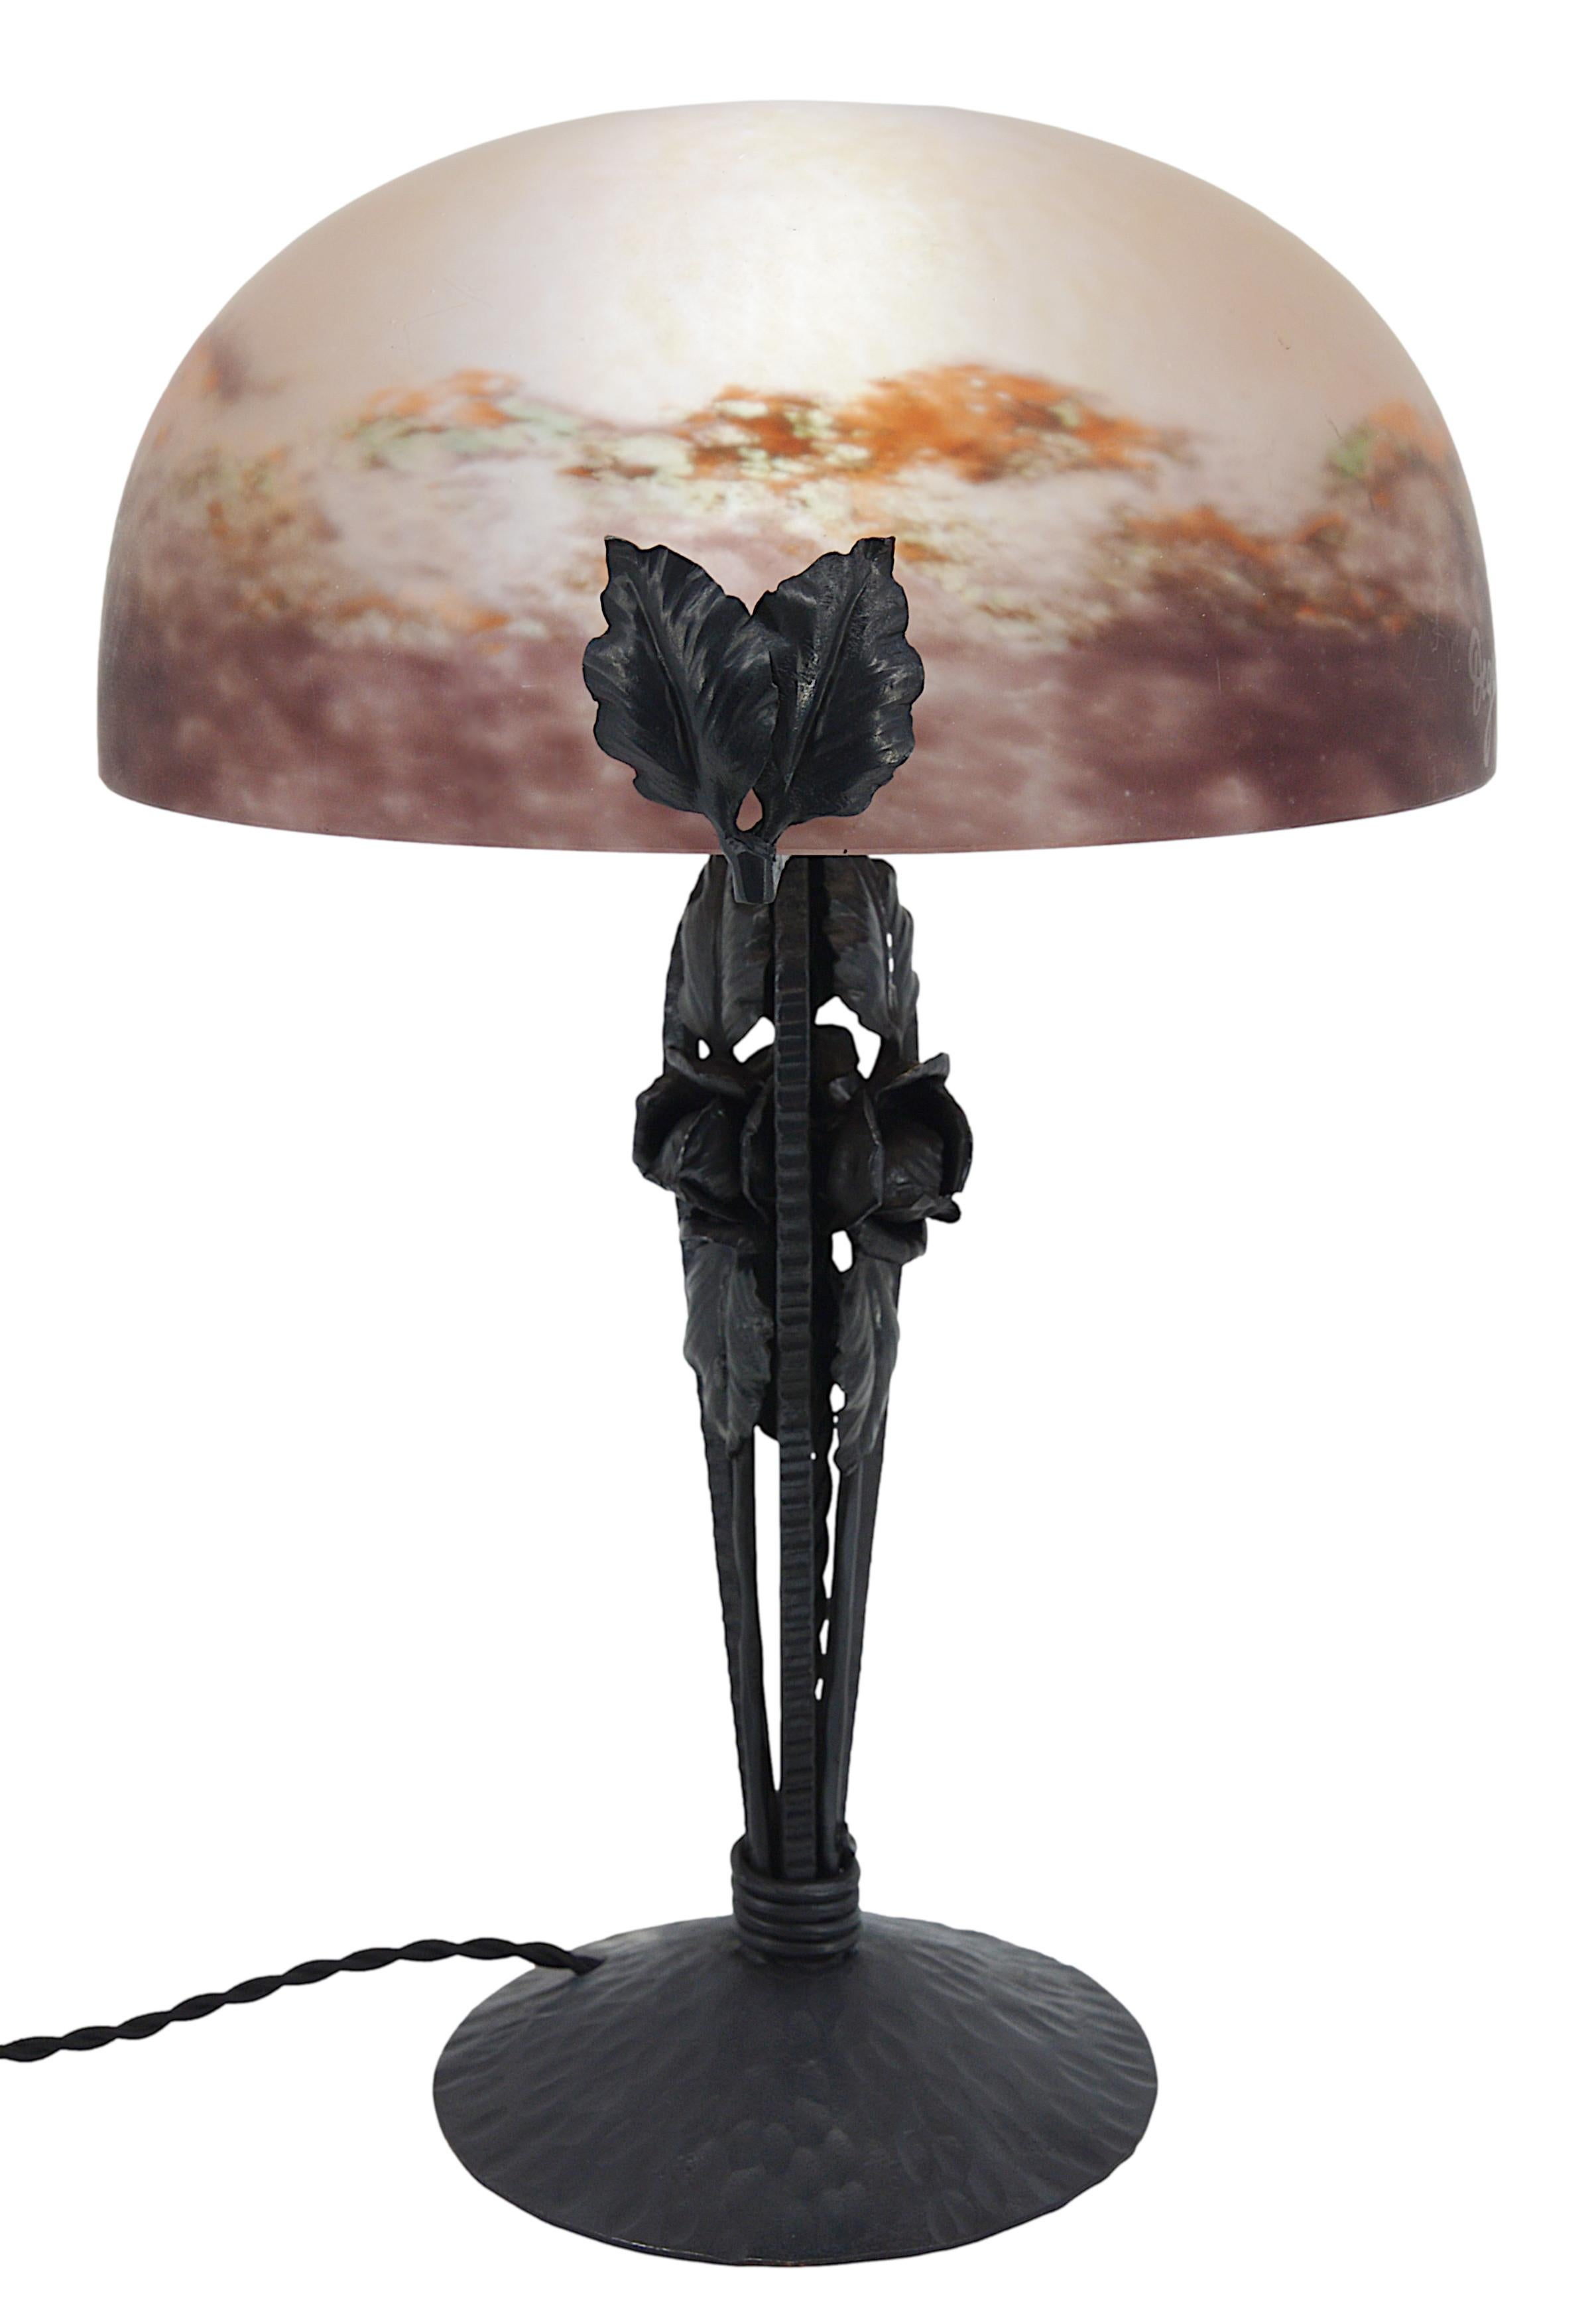 French Art Deco table lamp by DEGUE (Compiegne), France, late 1920s. Mottled glass shade. Colors : purple, orange, green. Wrought-iron base with roses. Height: 14.8